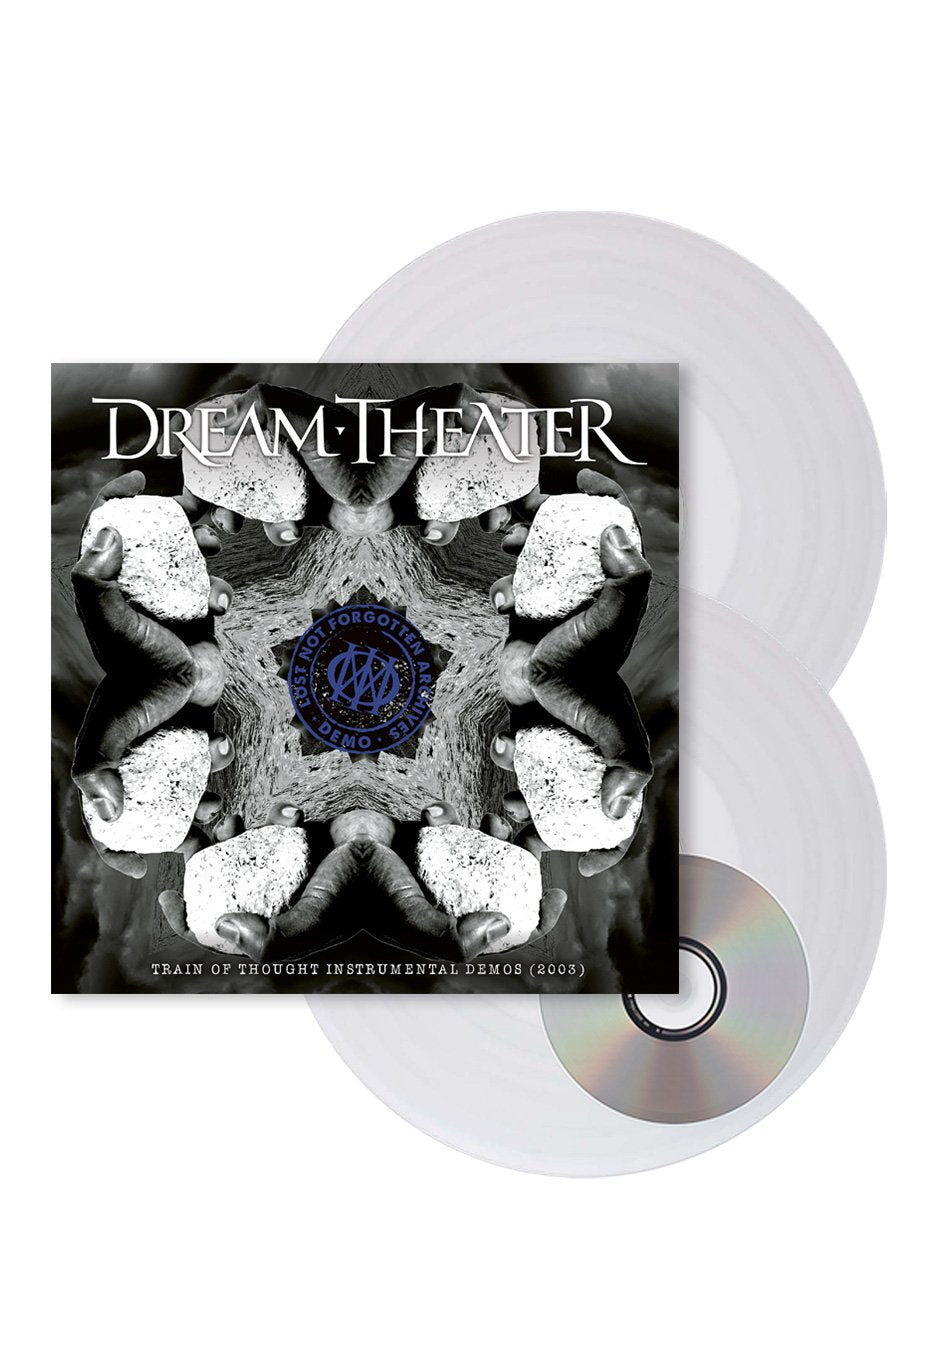 Dream Theater - Lost Not Forgotten Archives: Train Of Thought Instrumental Demos (2003) White - Colored 2 Vinyl + CD